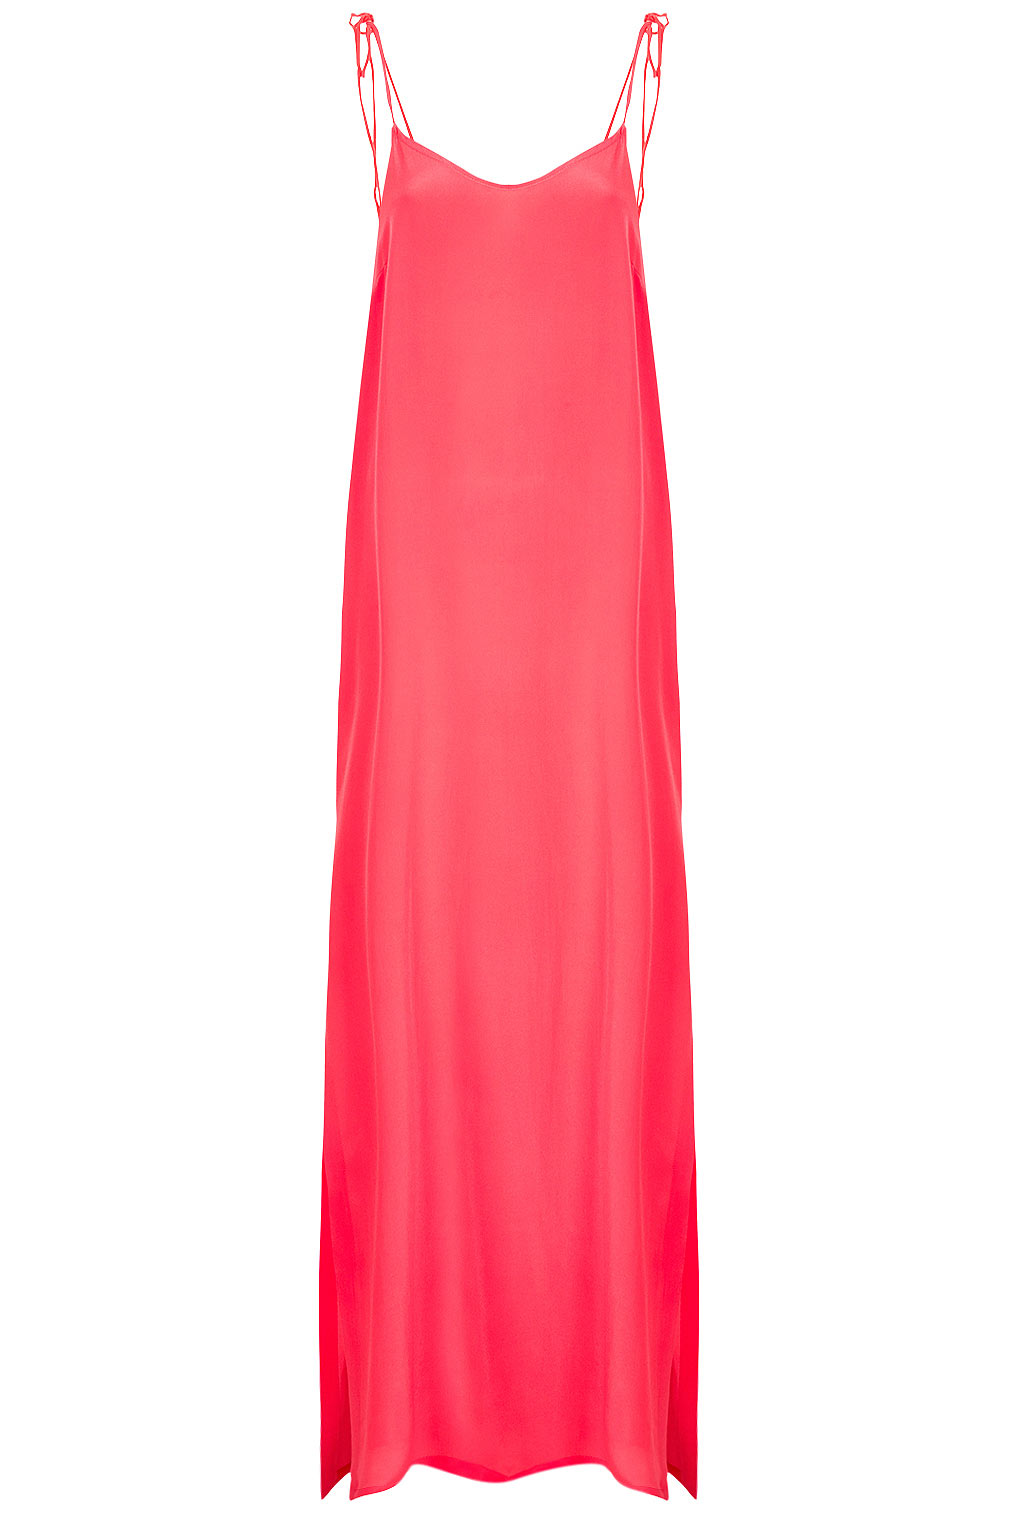 Topshop Scoop Back Maxi Slip Dress in Pink (bright pink) | Lyst